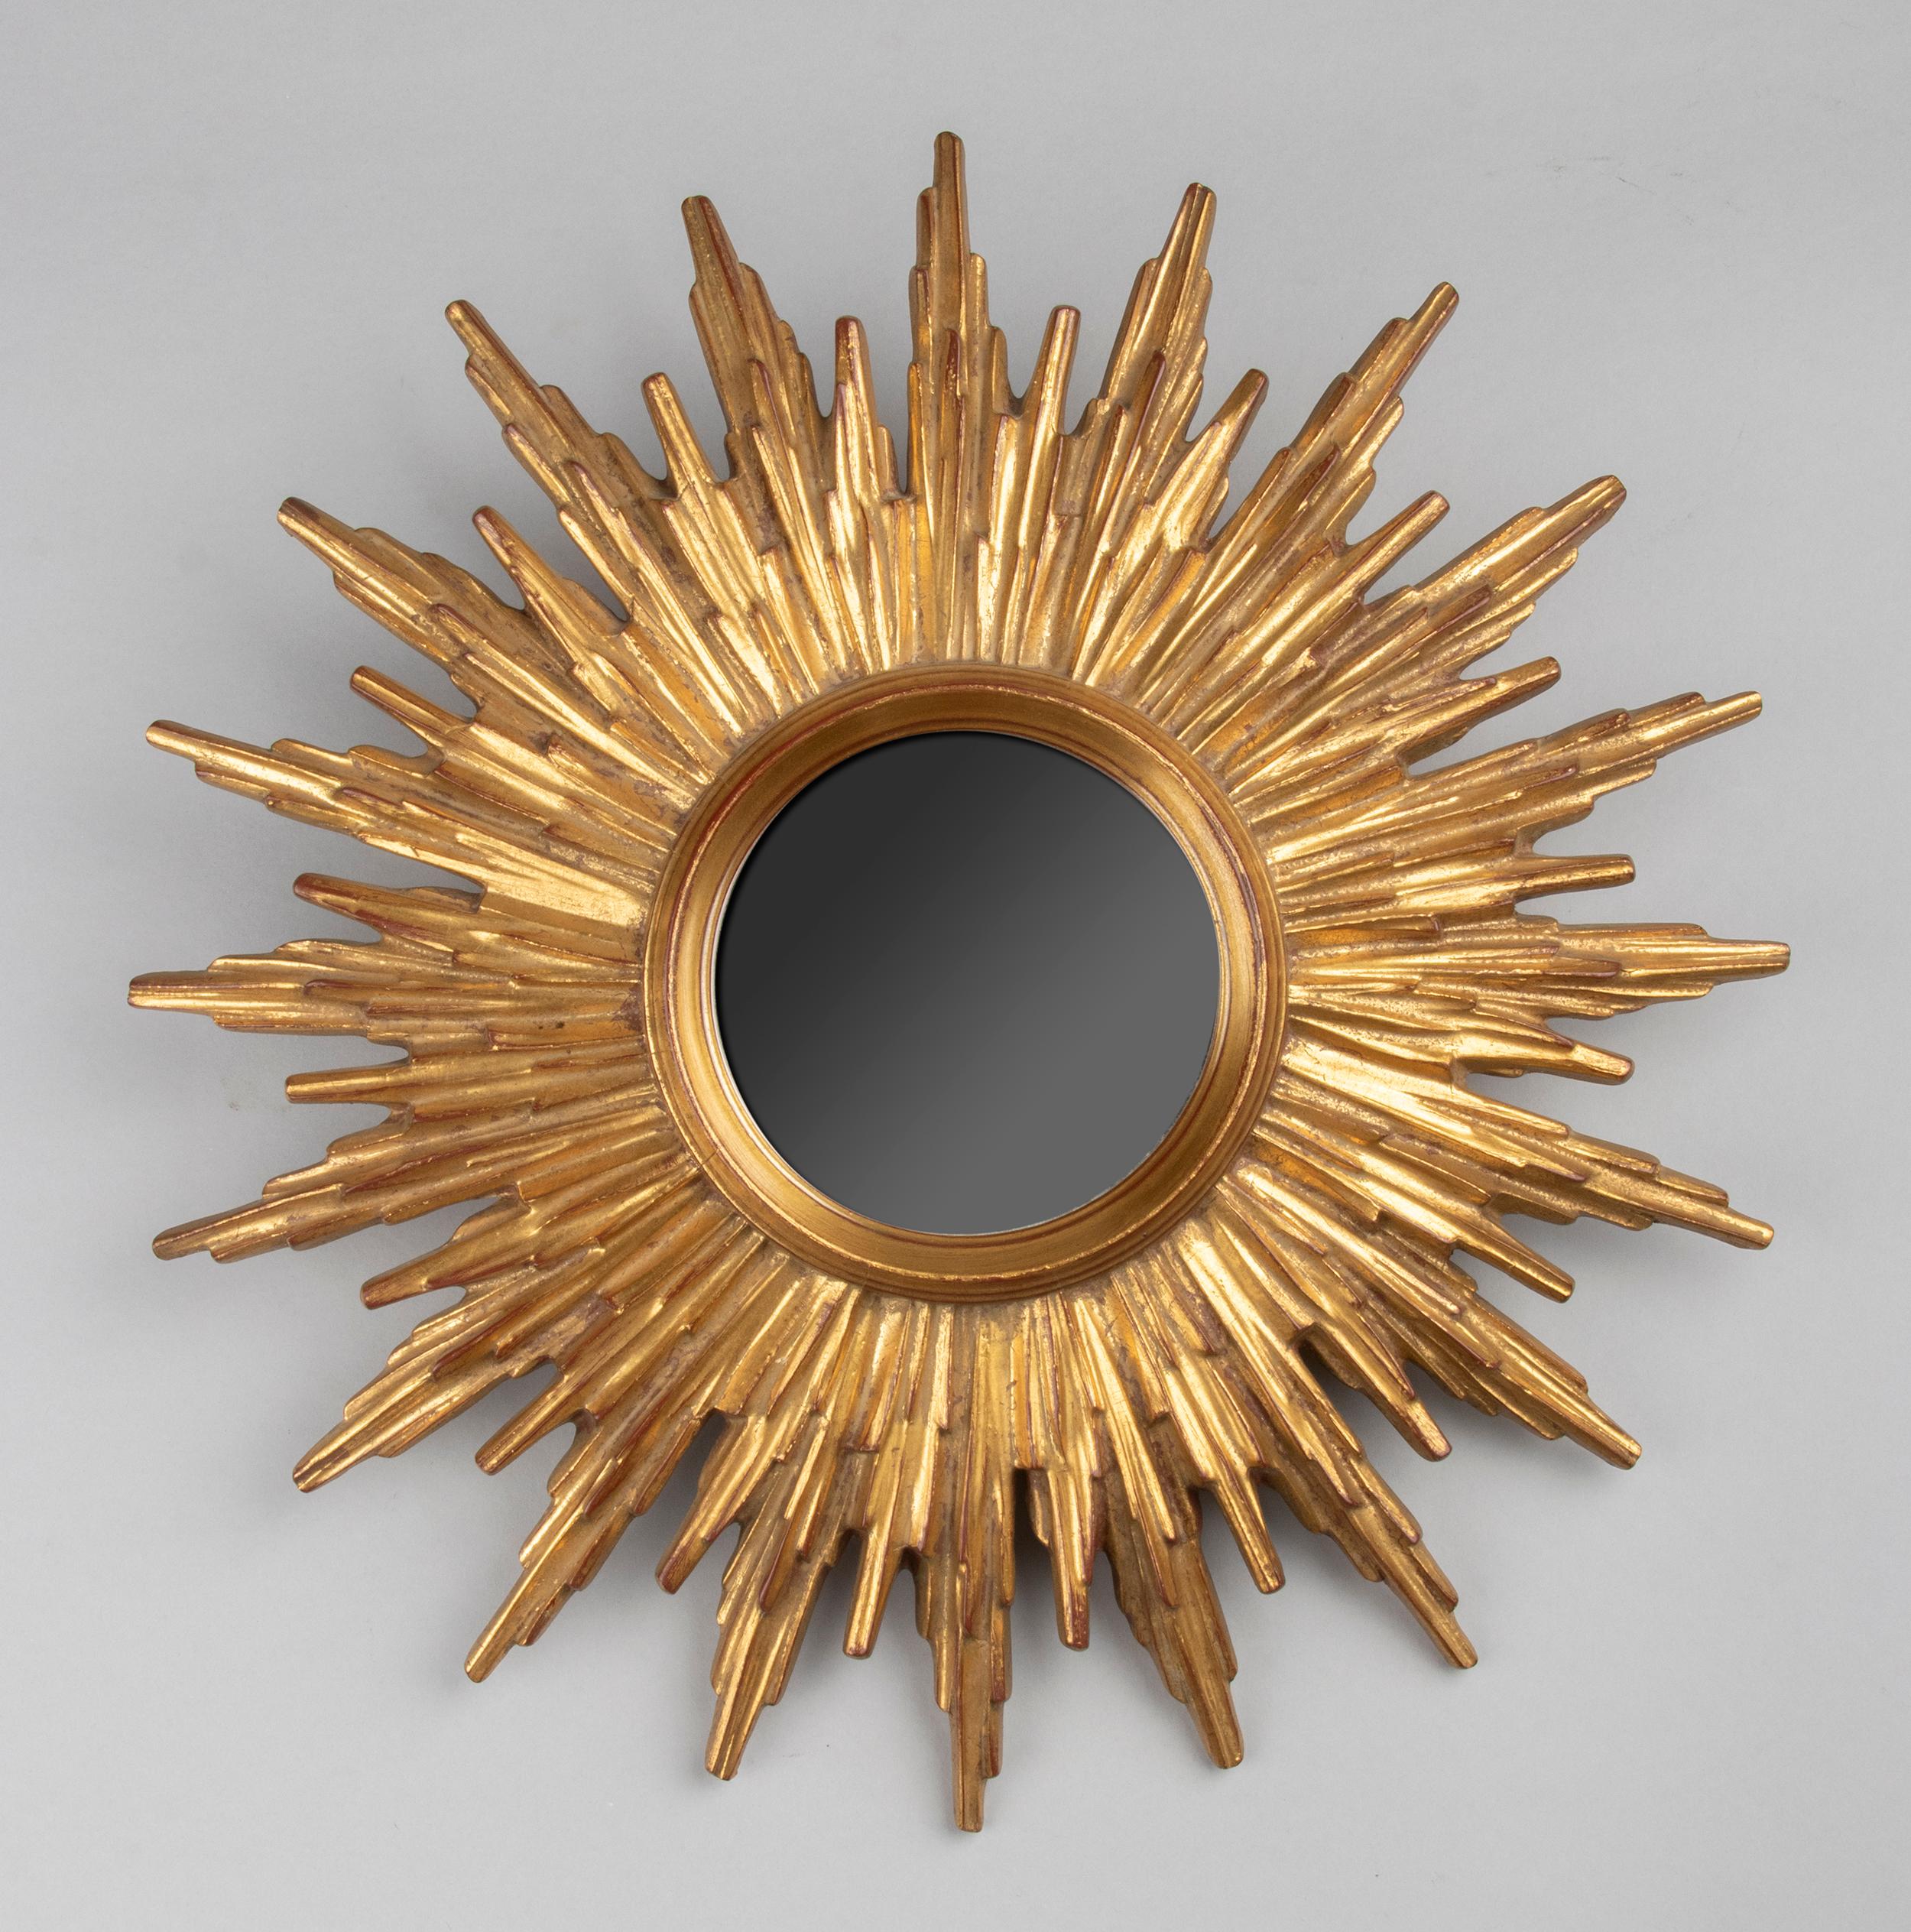 Beautiful sunburst mirror, made of composite, beautifully gilded. Probably a Deknudt product, as can be seen from the label on the back. The mirror is in good condition.